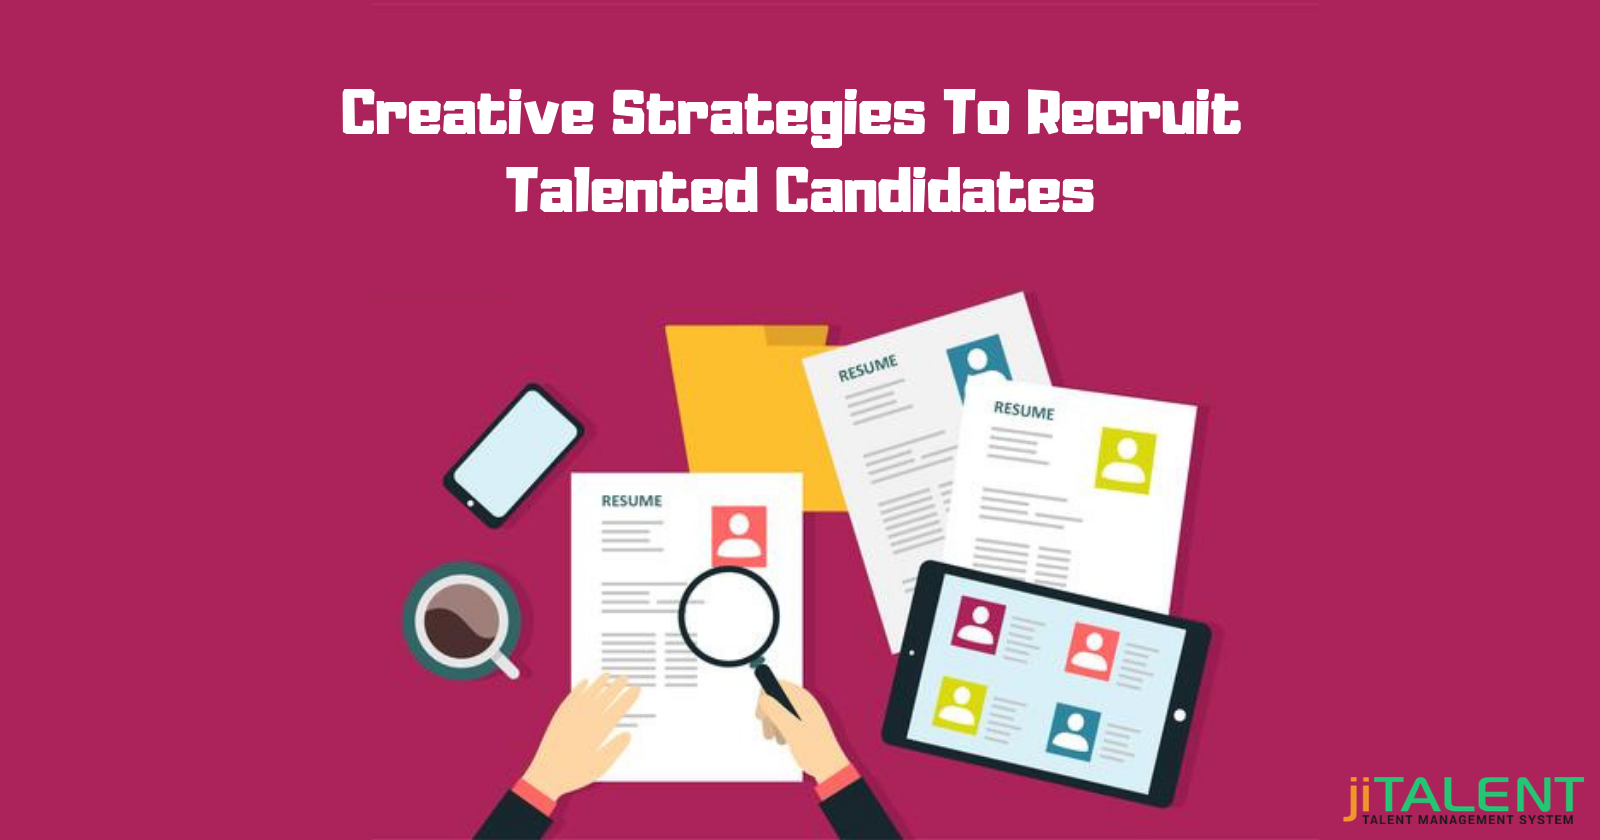 Find the Talented Candidate With Creative Recruiting Strategies